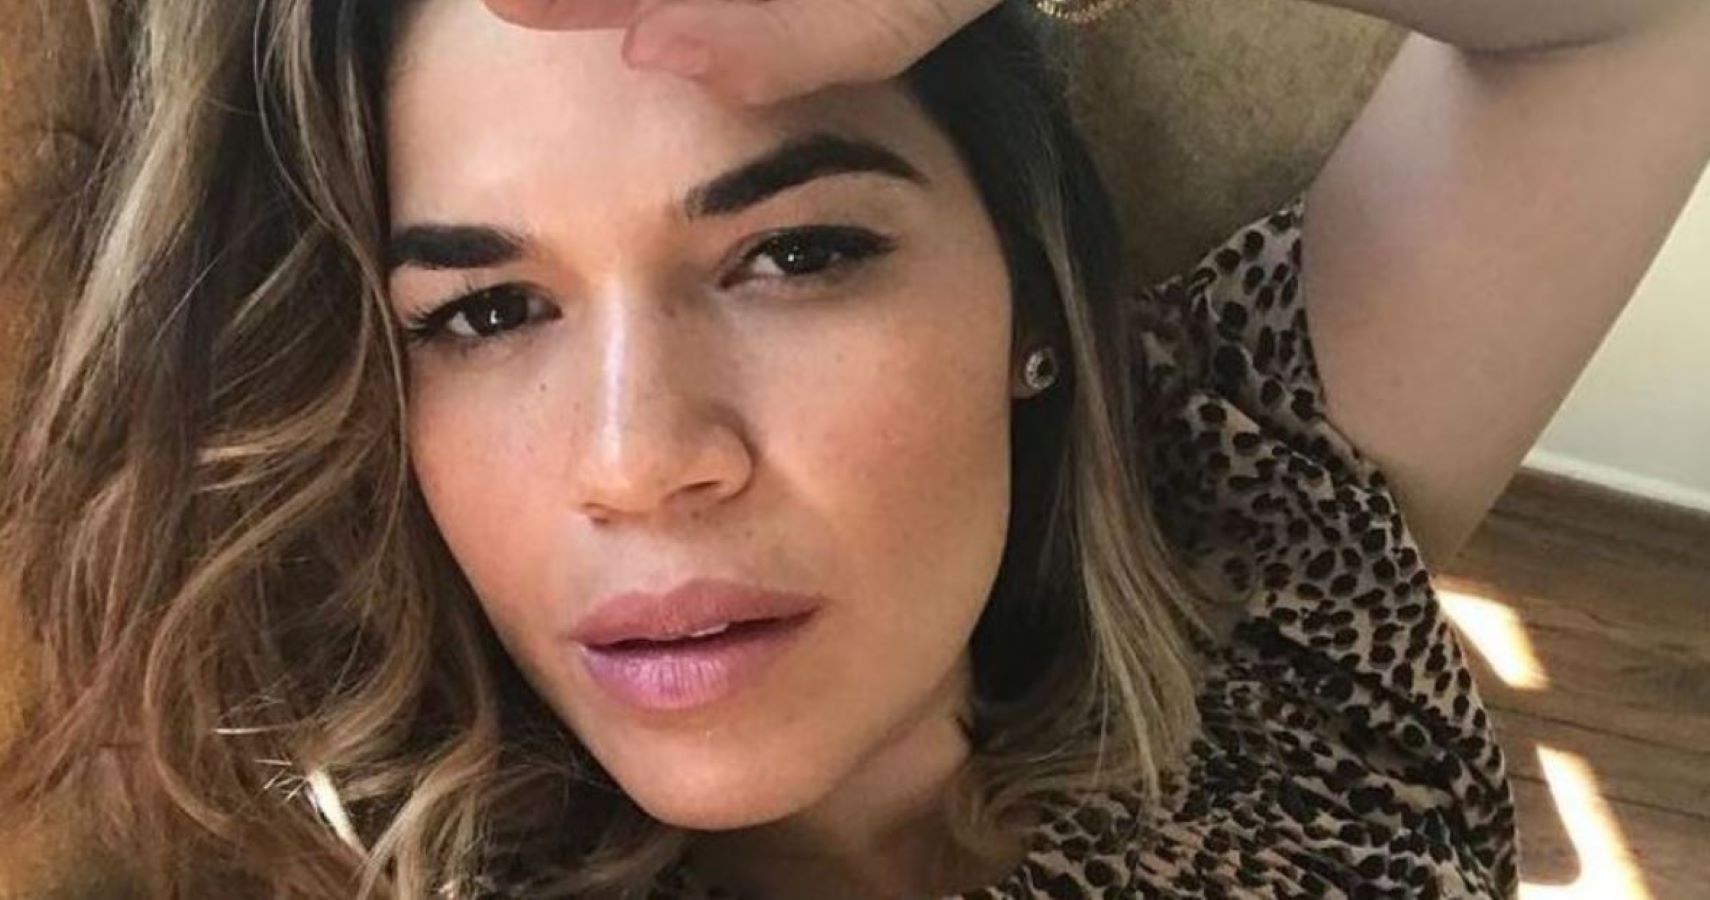 America Ferrera Shares Unseen Photo Of Herself Giving Birth During The Pandemic